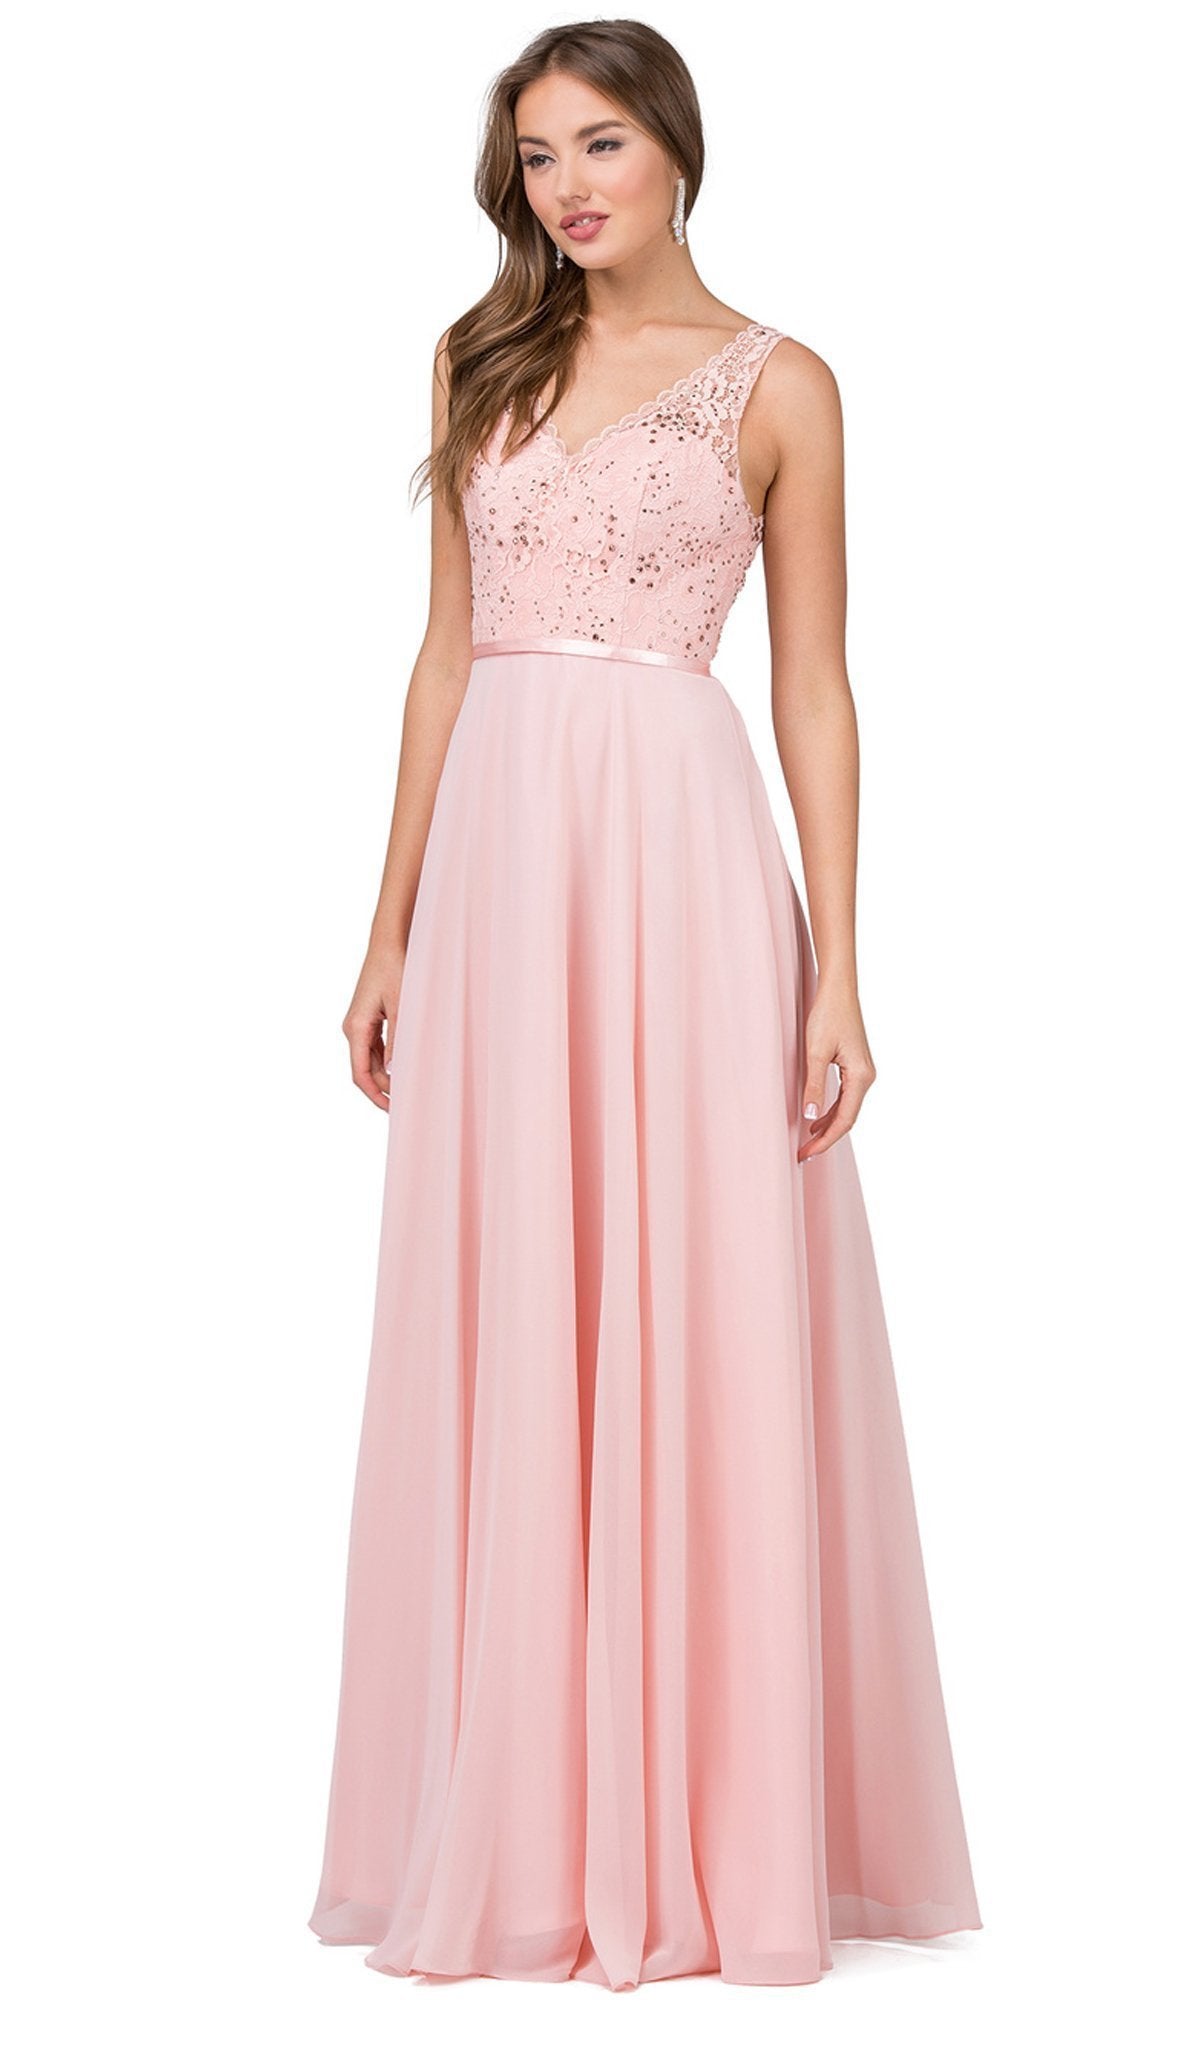 Dancing Queen - 2267 Sleeveless Scalloped Lace Illusion Prom Gown in Pink